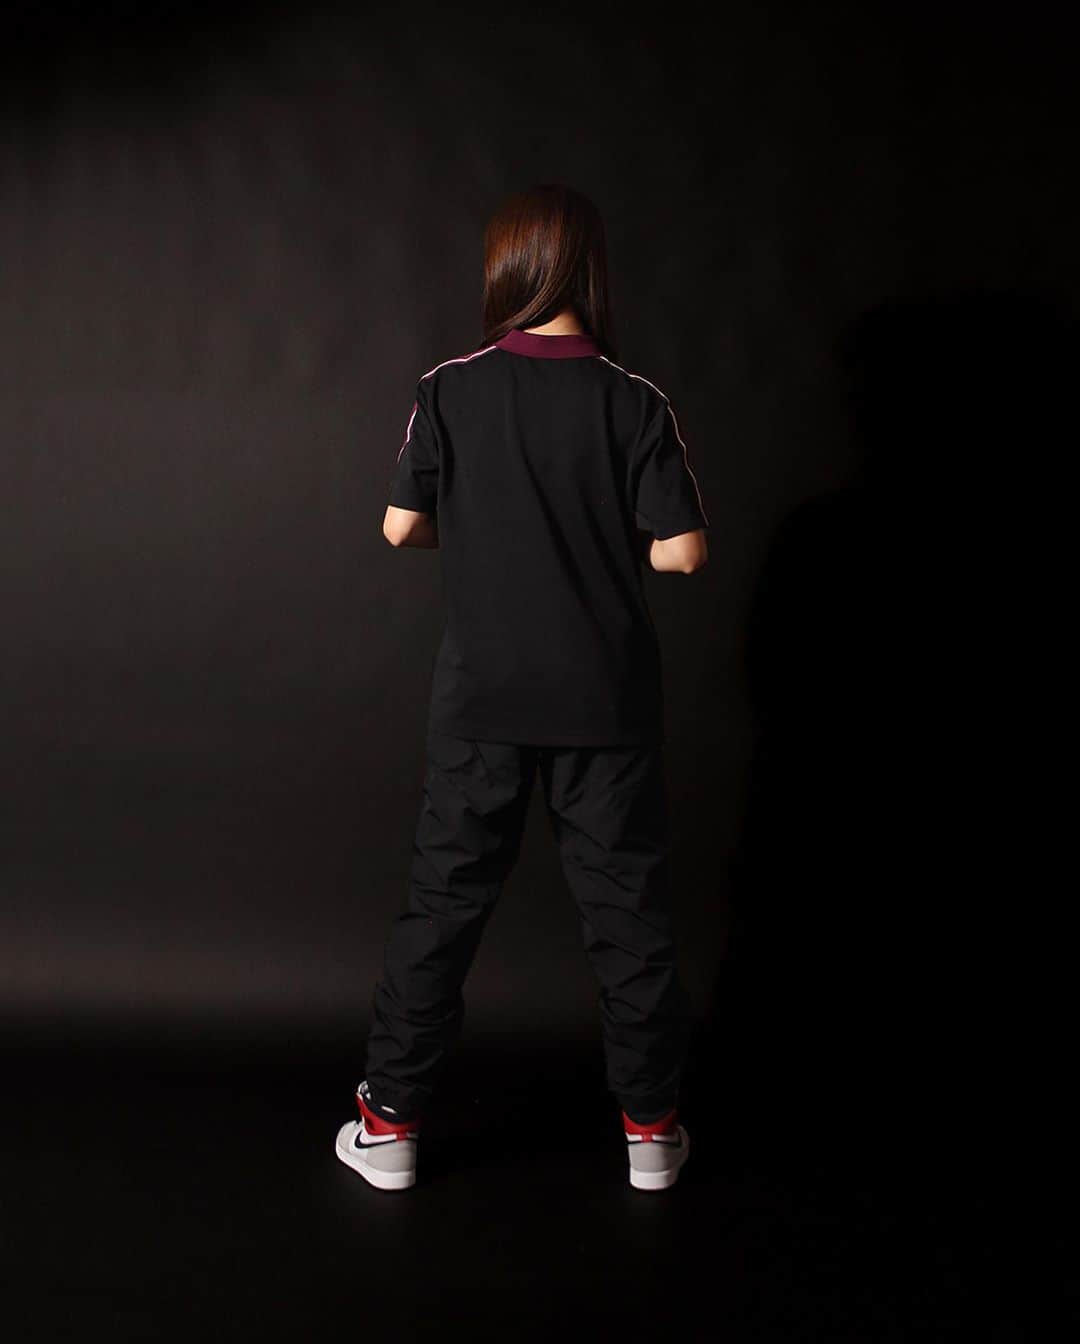 A+Sさんのインスタグラム写真 - (A+SInstagram)「2020 .10 .11 (sun) in store  ■NIKE JORDAN PSG TAPED POLO COLOR : BLACK×BORDEAUX SIZE : S - 2XL PRICE : ¥8,500 (+TAX)  パリ・サンジェルマンのテーピングポロは、試合後のプレッサーで着用したチームアパレルから着想を得ています。クラシックなピケ生地、折り畳み式の襟、2ボタンの前立てが特徴です。肩に沿ったストライプのテープがコントラストの要素を加えています。  THE PARISIAN POLO. The Paris Saint-Germain Taped Polo is inspired by team apparel worn during the post-match presser. It features classic piqué fabric, a fold-down collar and 2-button placket. Striped tape along the shoulders adds an element of contrast.  ■NIKE JORDAN PSG FLEECE PANT COLOR : BLACK SIZE : S - 2XL PRICE : ¥8,000 (+TAX)  フランスのサッカークラブ、パリ・サンジェルマンとジョーダンのブランドのデザインコラボレーションは続いています。これらのパンツは、暖かく、柔らかく起毛した生地から作られ、パートナーシップを祝う明白なグラフィックとパッチの詳細で際立っています。  REPRESENT IN RELAXED WARMTH. The design collaboration between French soccer club Paris Saint-Germain and Jordan brand continues. These pants are made from warm, softly brushed fabric and stand out with overt graphics and patch detail celebrating the partnership.  #a_and_s #NIKE #PSG #JORDAN #JUMPMAN #JUMPMAN23 #NIKEJORDAN #JORDANBRAND #JORDANBRANDPSG #CICESTPARIS #PANAME」10月7日 11時50分 - a_and_s_official